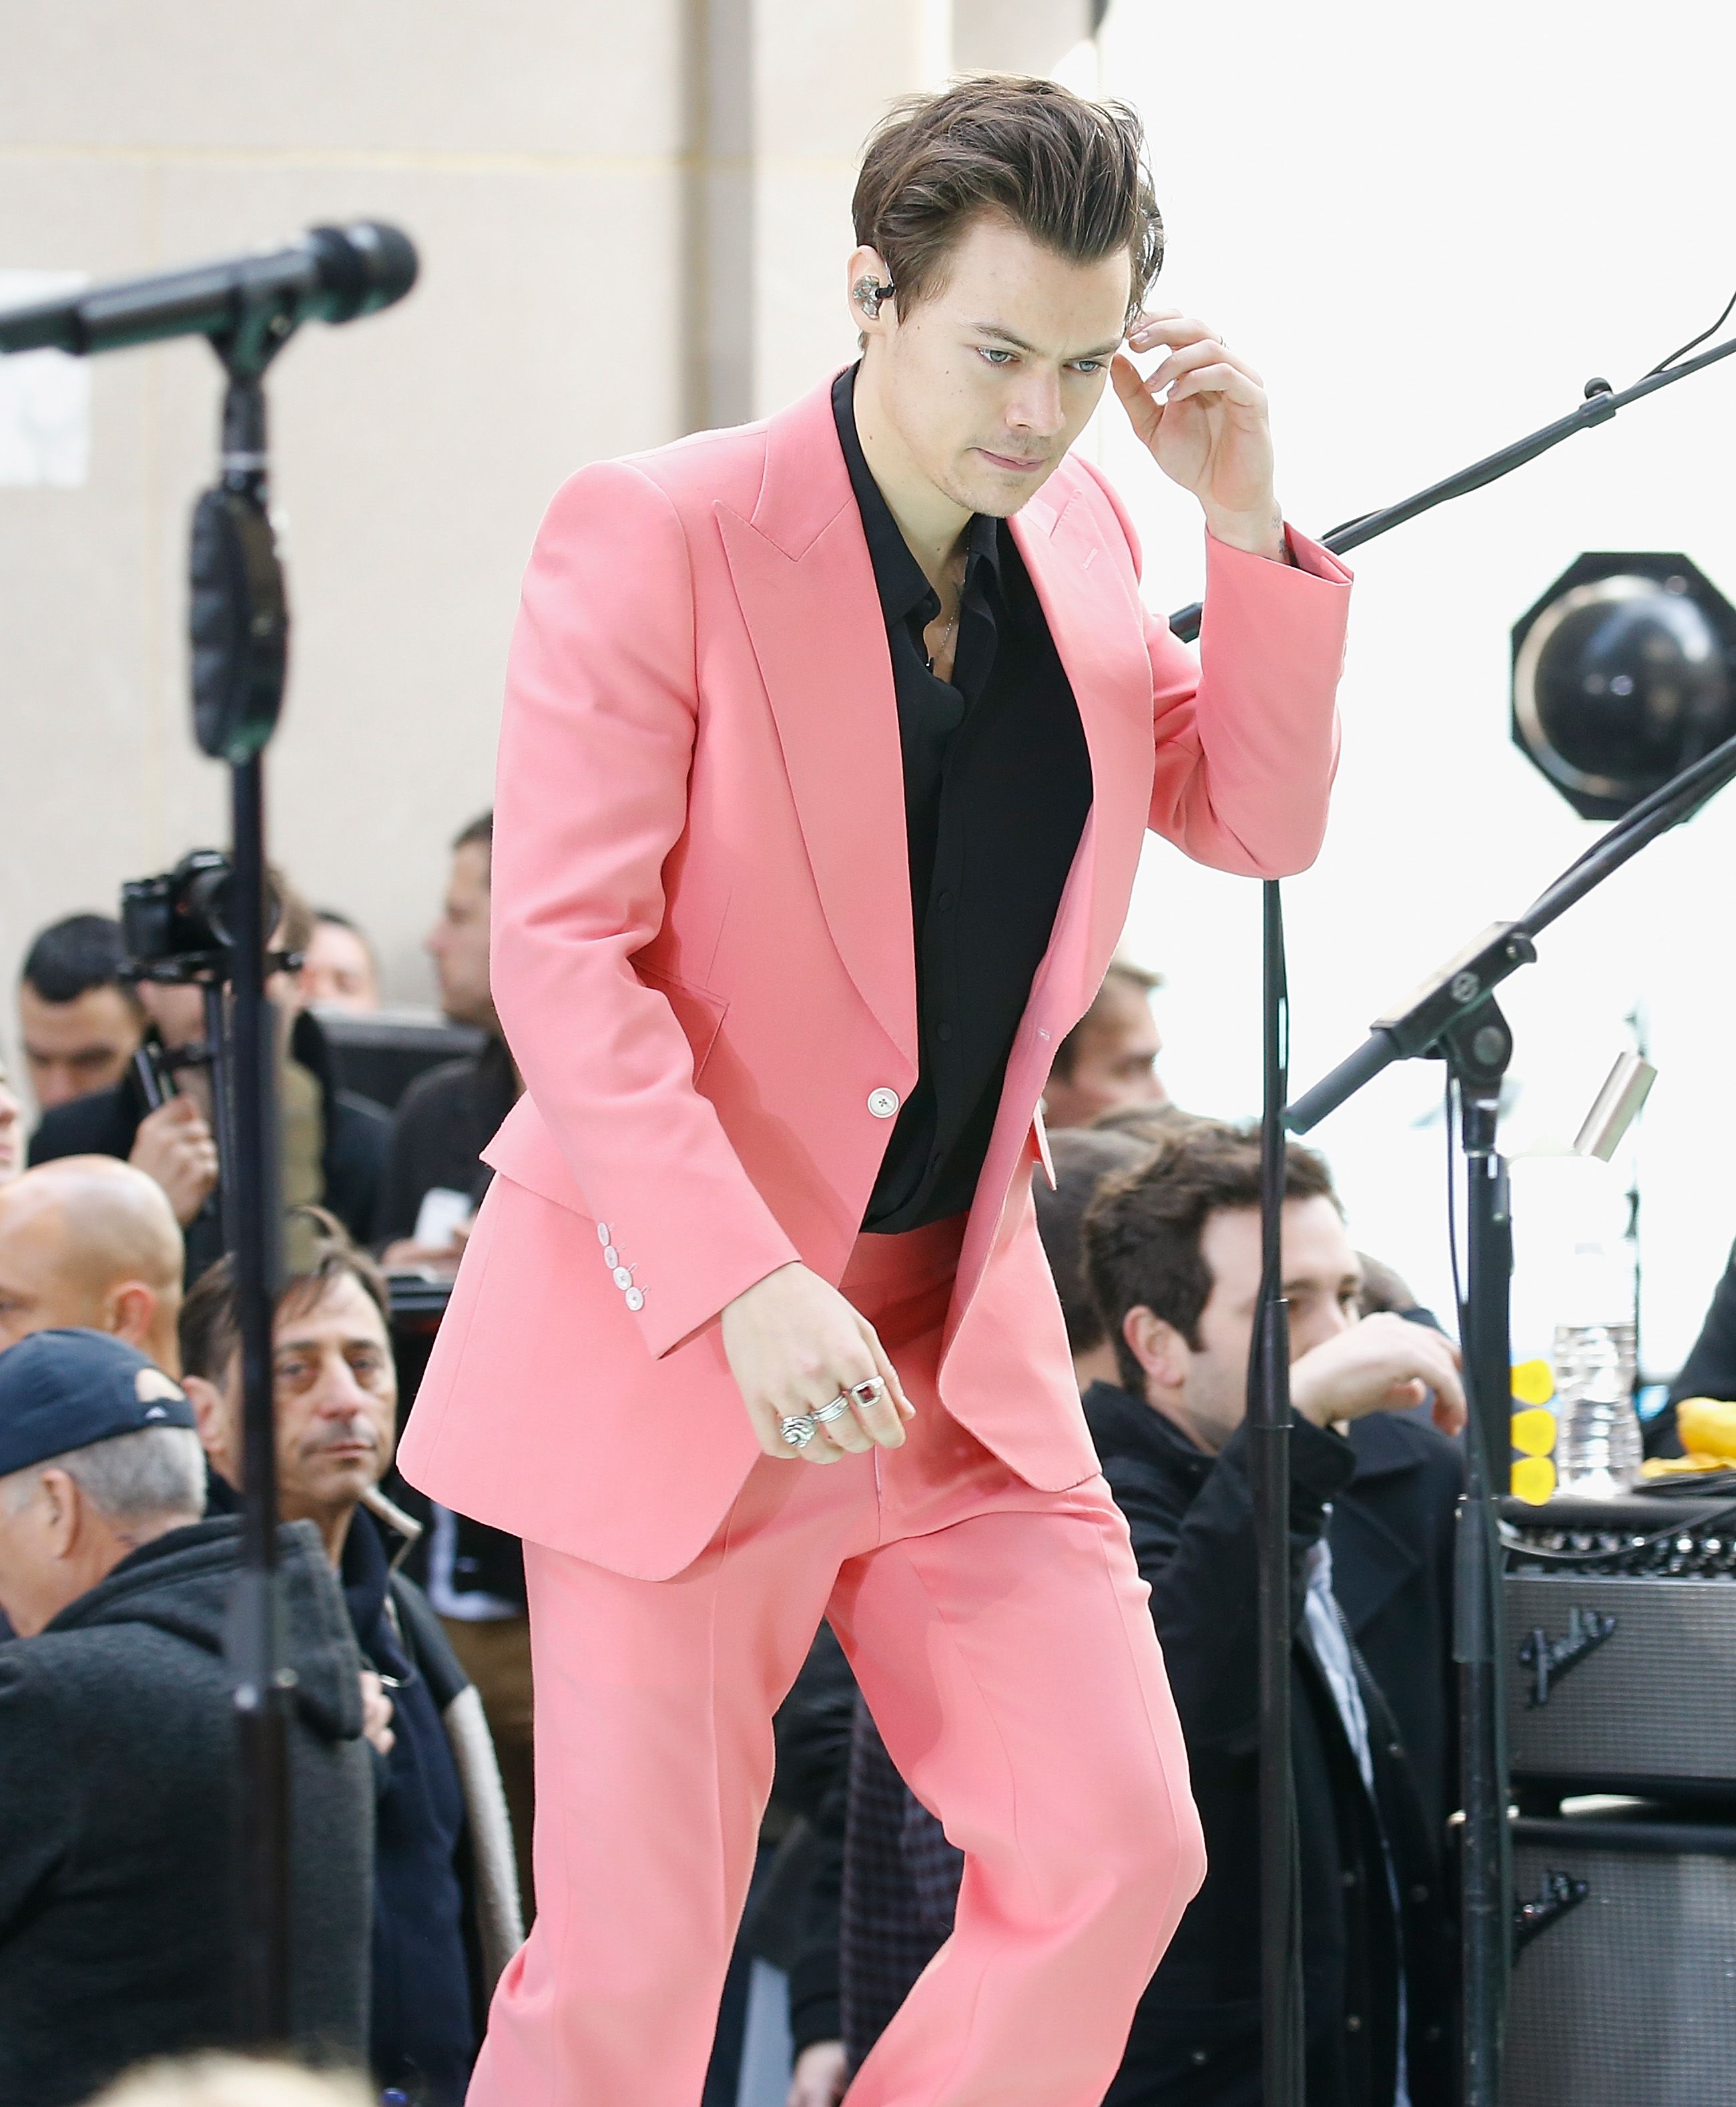 Harry Styles's Gucci Suit Now Has A Place In Music History, As